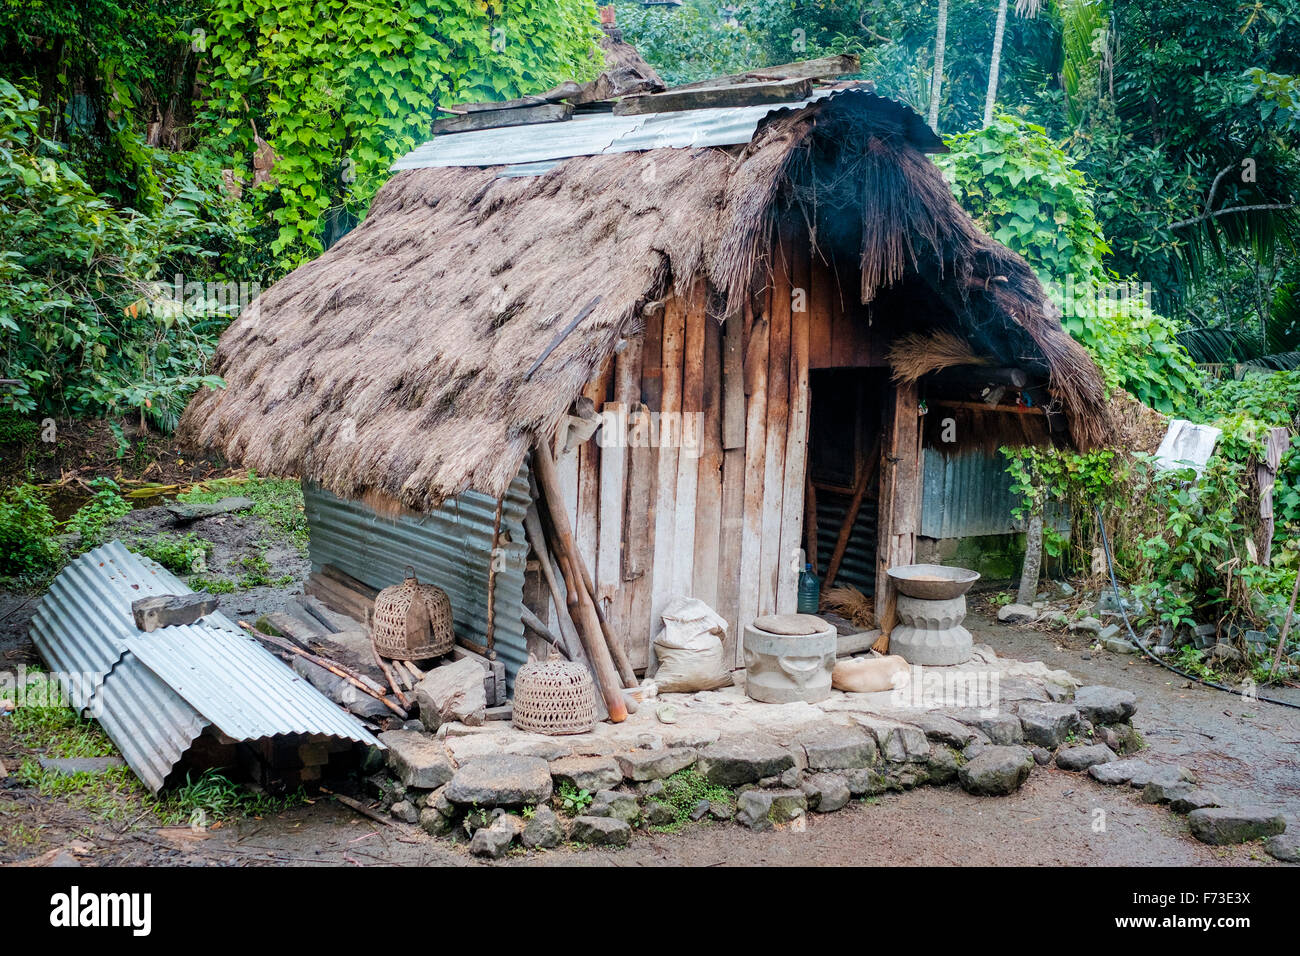 Traditional Ifugao wooden and thatched hut in Batad Village, Cordillera Administrative Region, Philippines Stock Photo